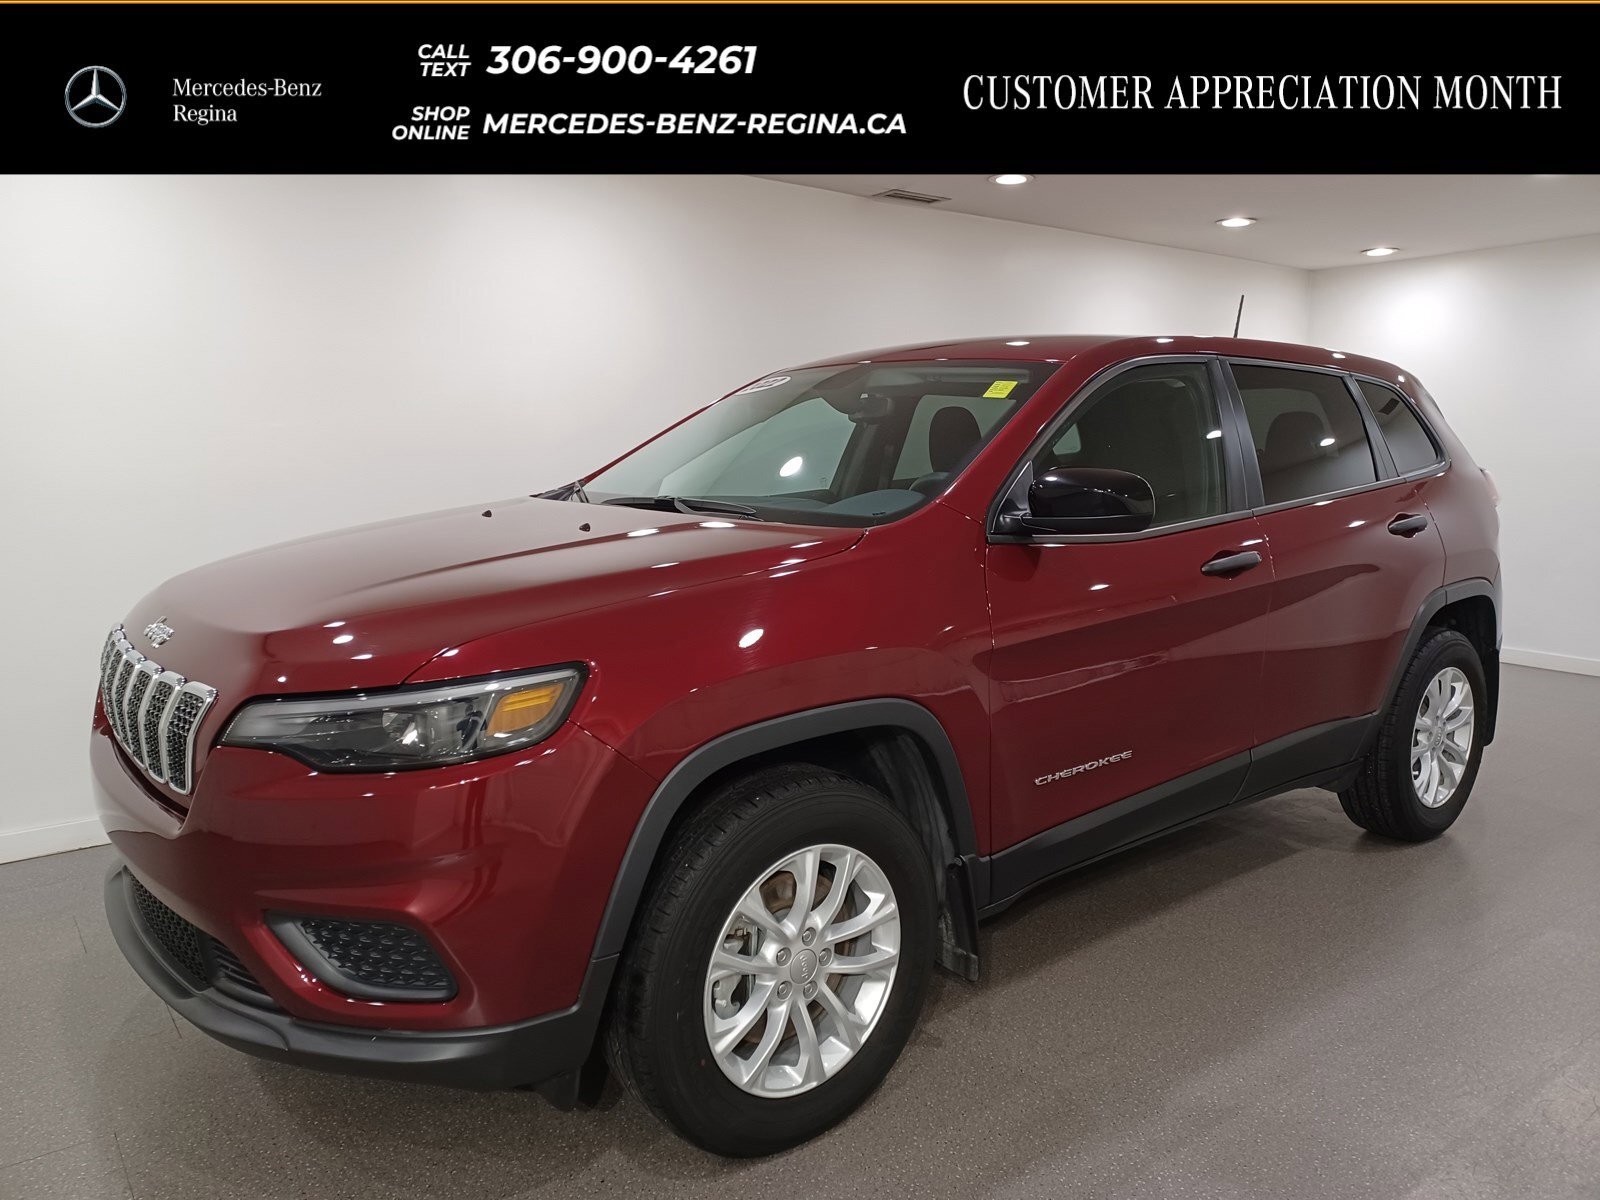 2022 Jeep Cherokee Sport , Local Trade, Accident Free, Low KM